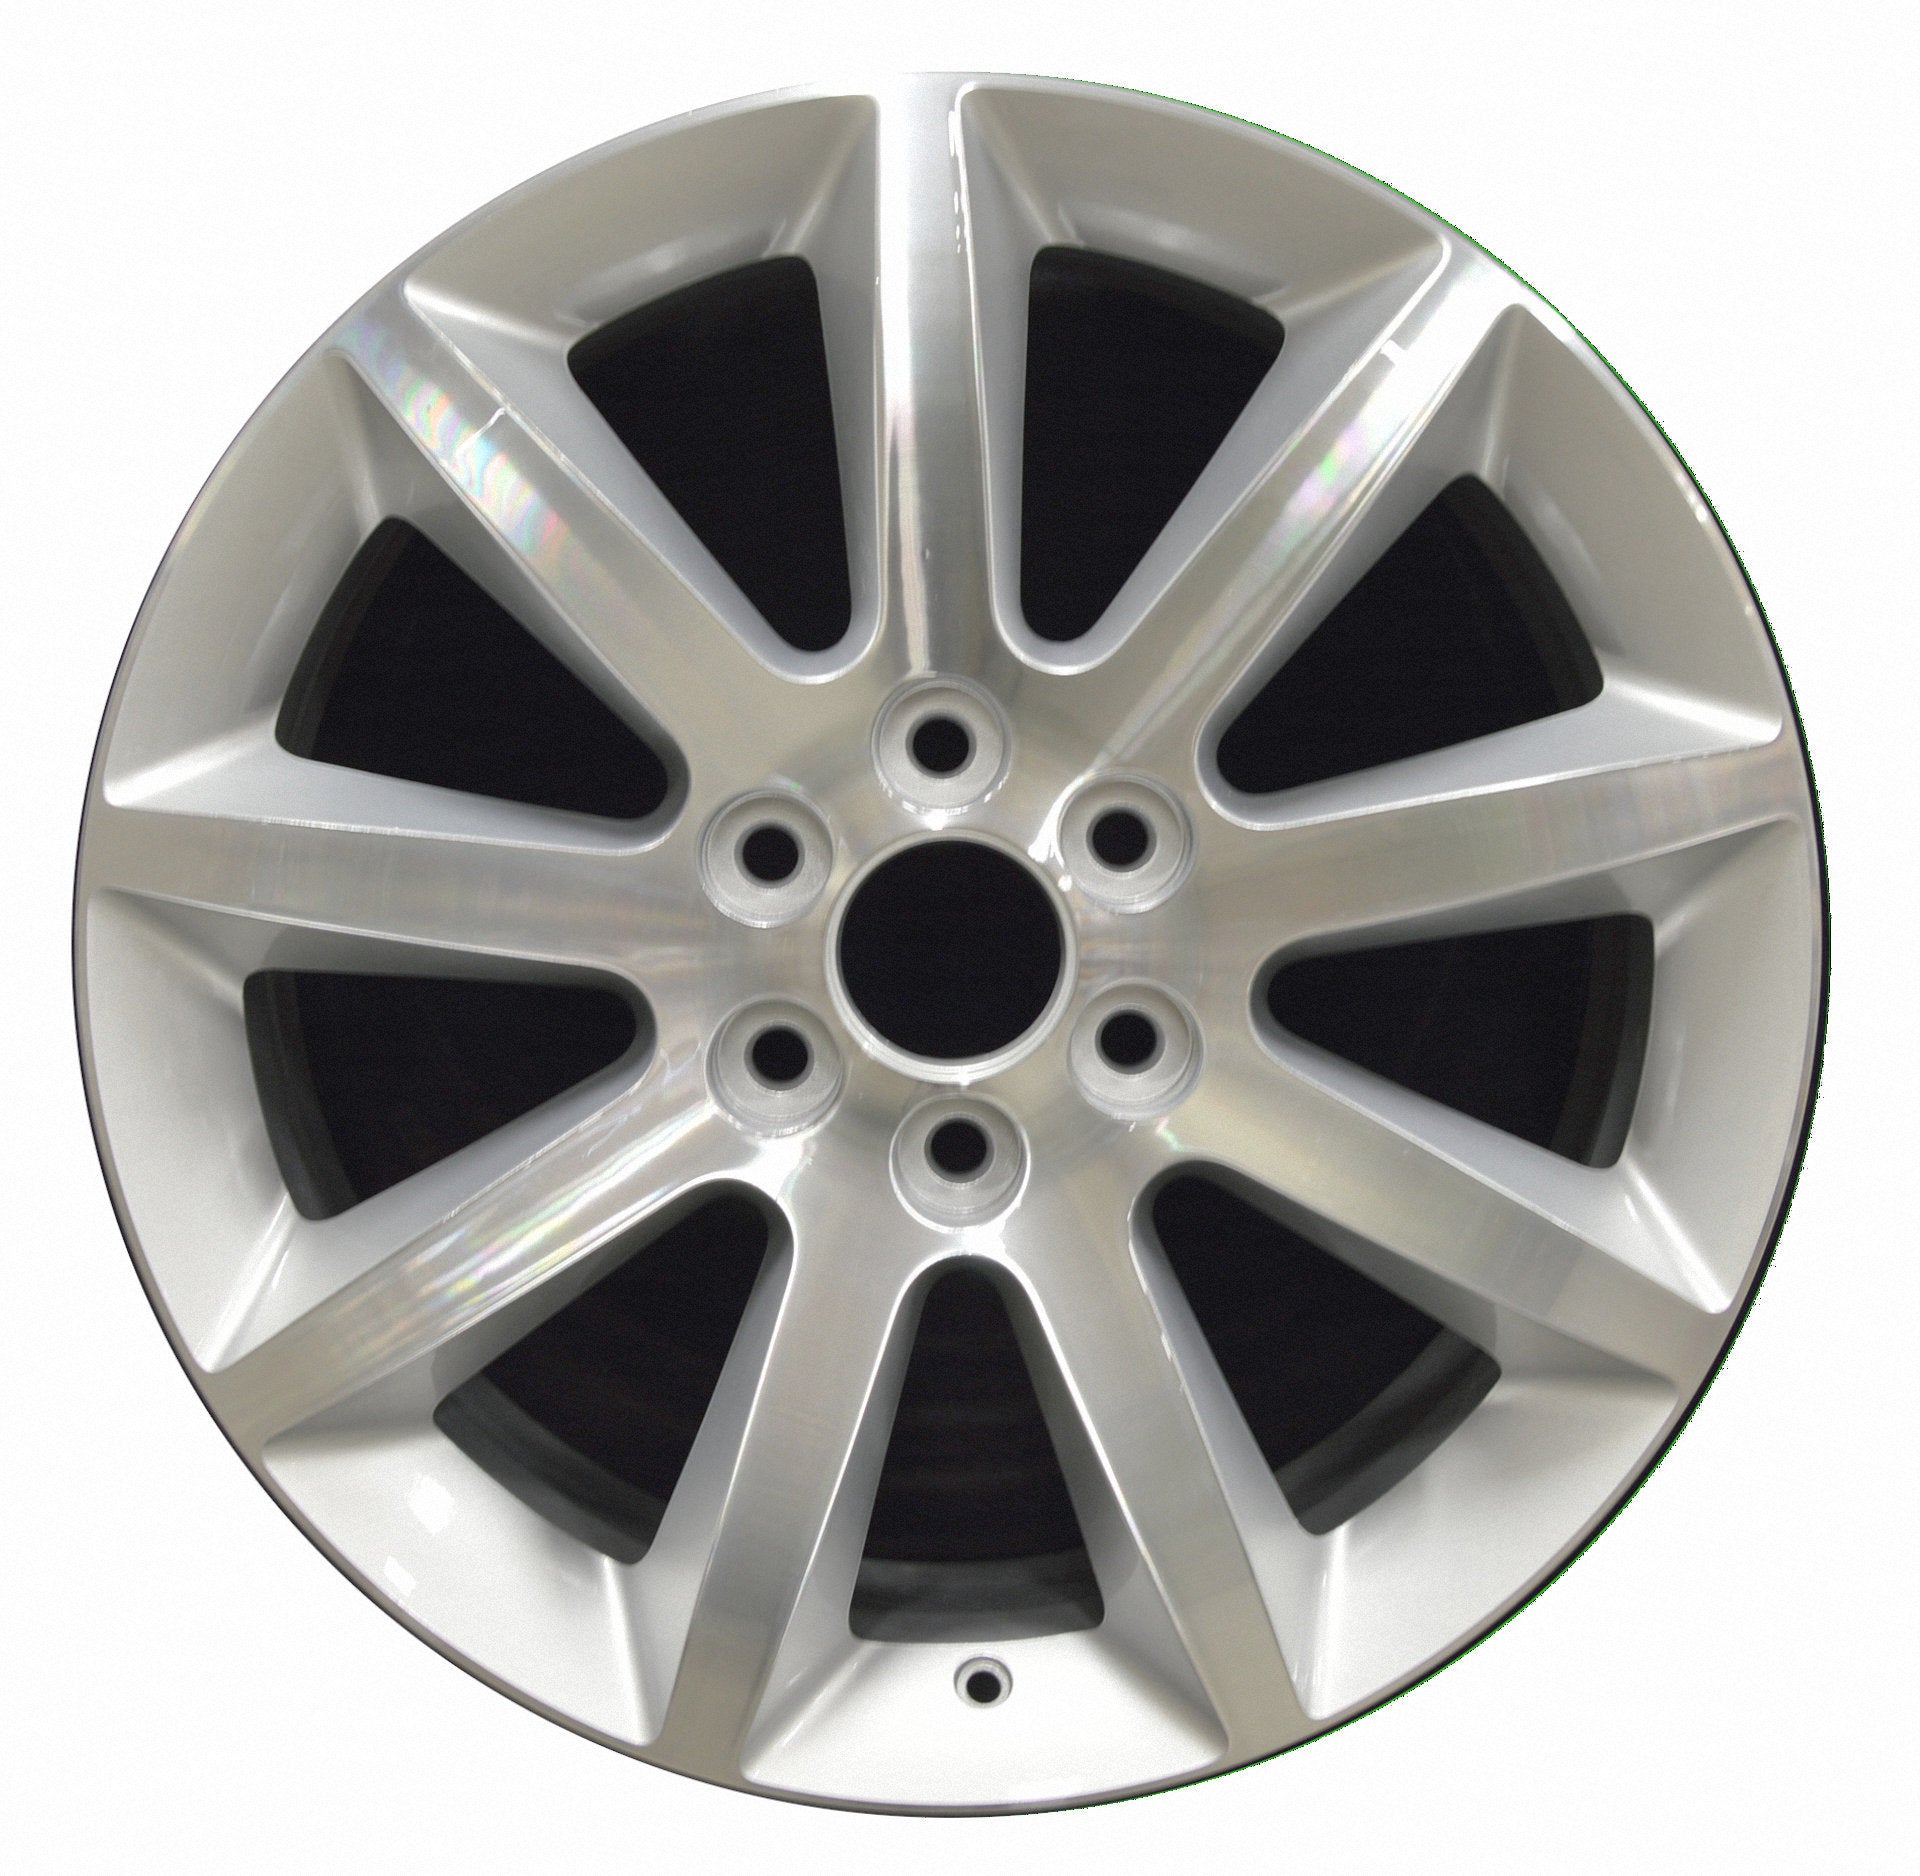 Buick Enclave  2013, 2014, 2015, 2016, 2017 Factory OEM Car Wheel Size 20x7.5 Alloy WAO.4132.LS100V1.MABRT